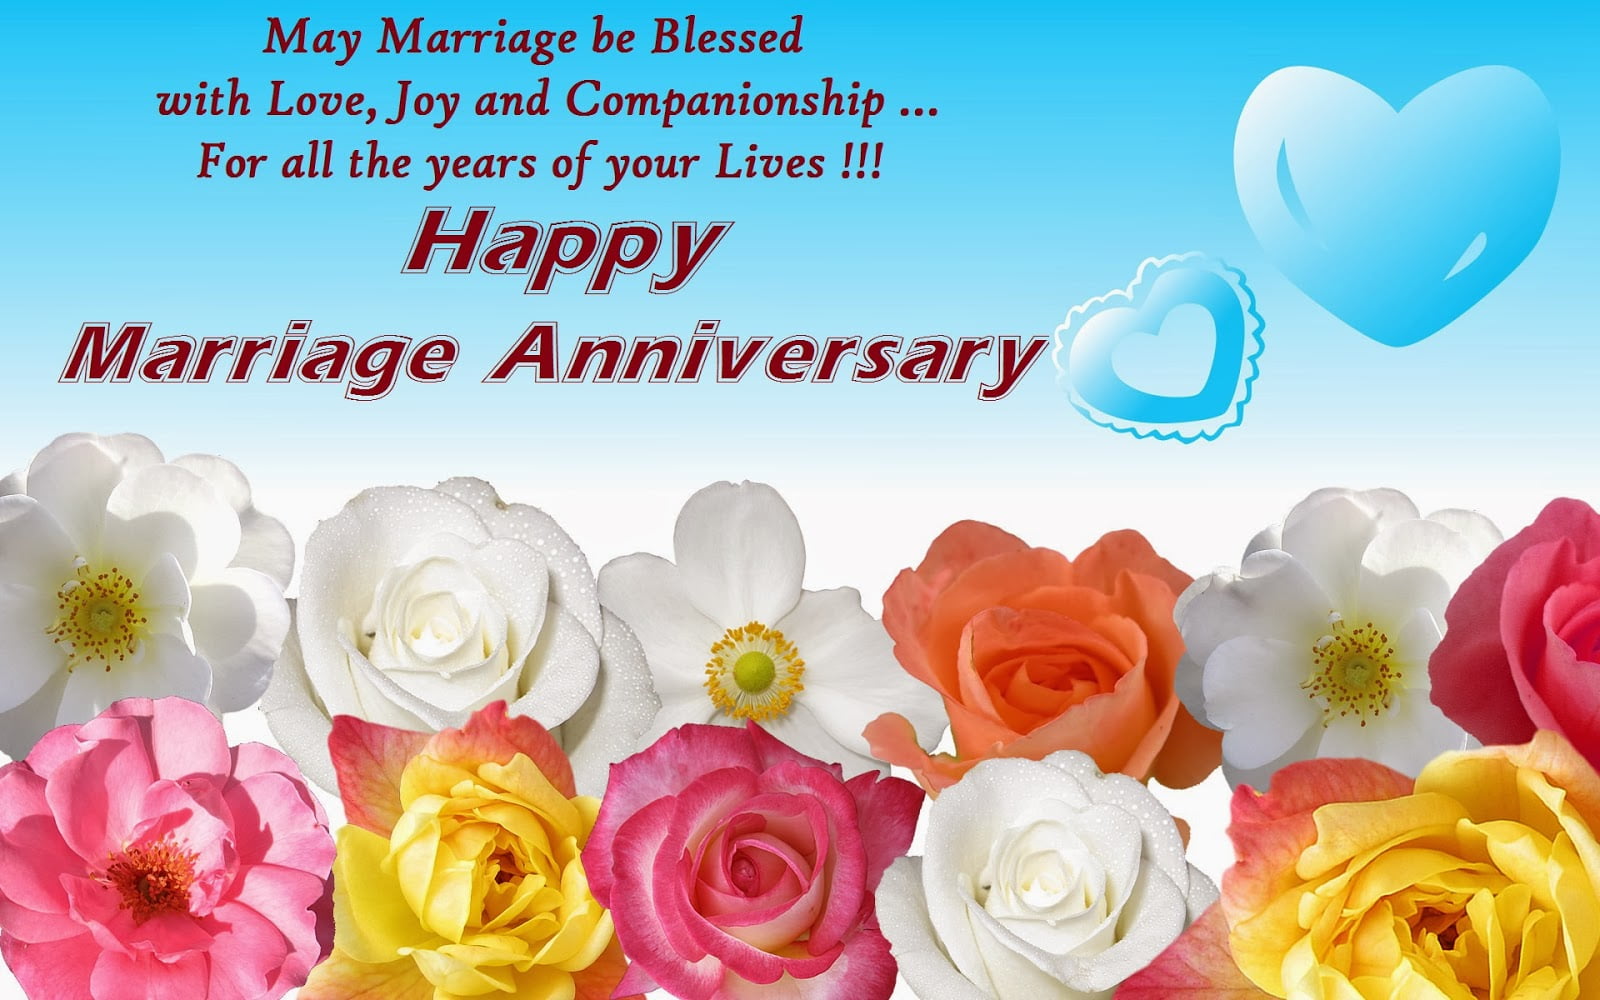 Best Happy Wedding Anniversary Wishes Images Cards Greetings Photos For Husband Wife